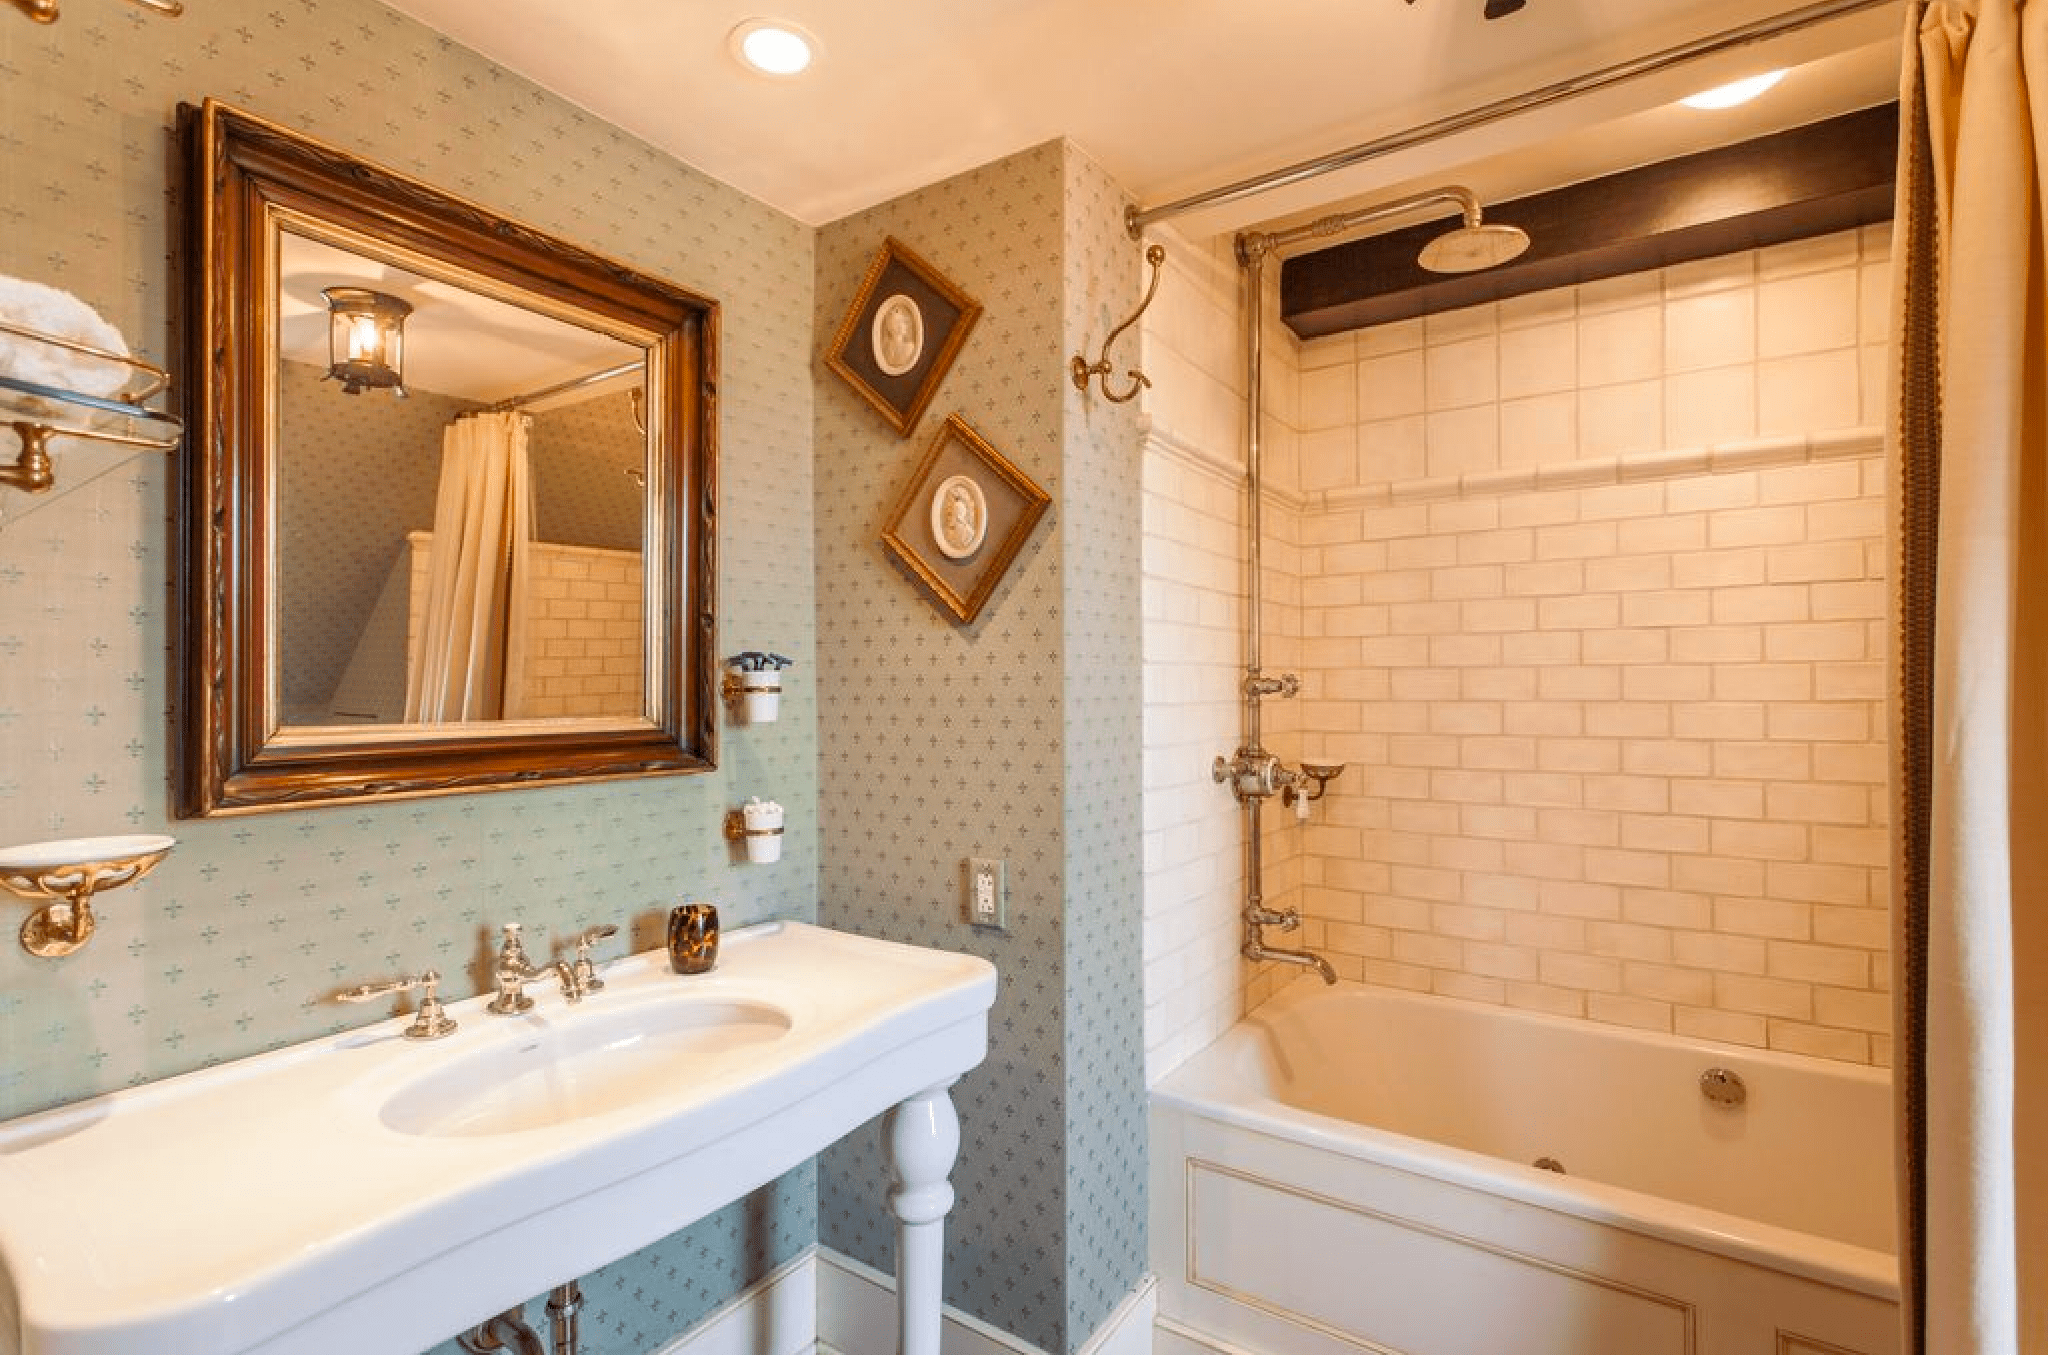 Carriage house bathroom in historic home